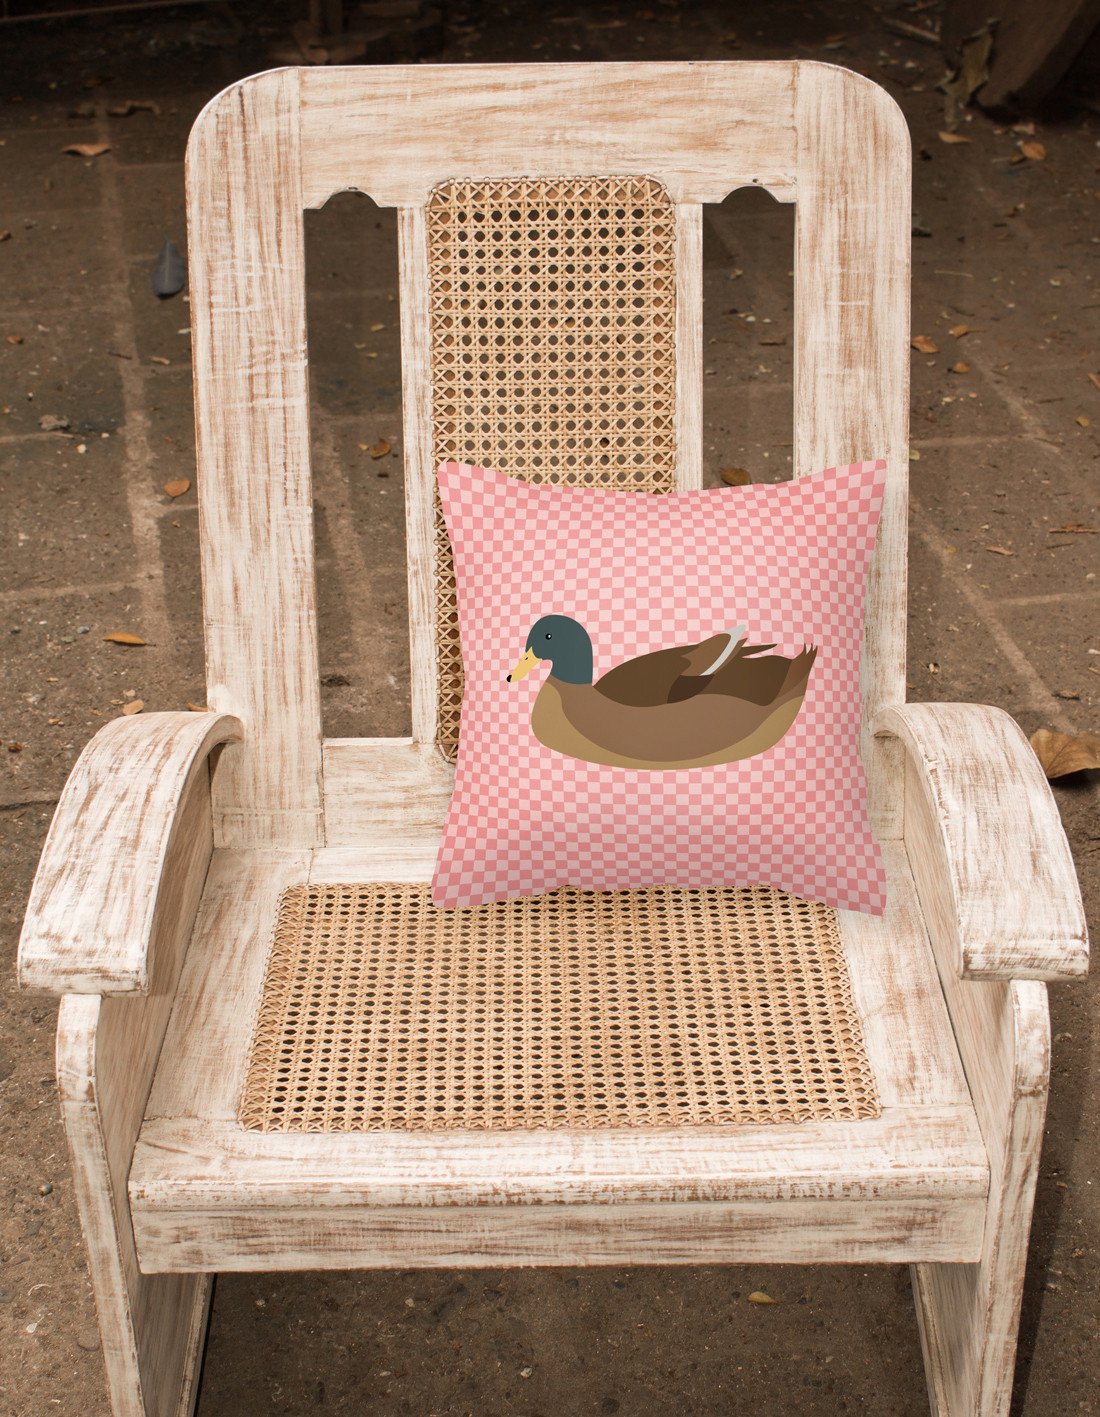 Khaki Campbell Duck Pink Check Fabric Decorative Pillow BB7866PW1818 by Caroline's Treasures